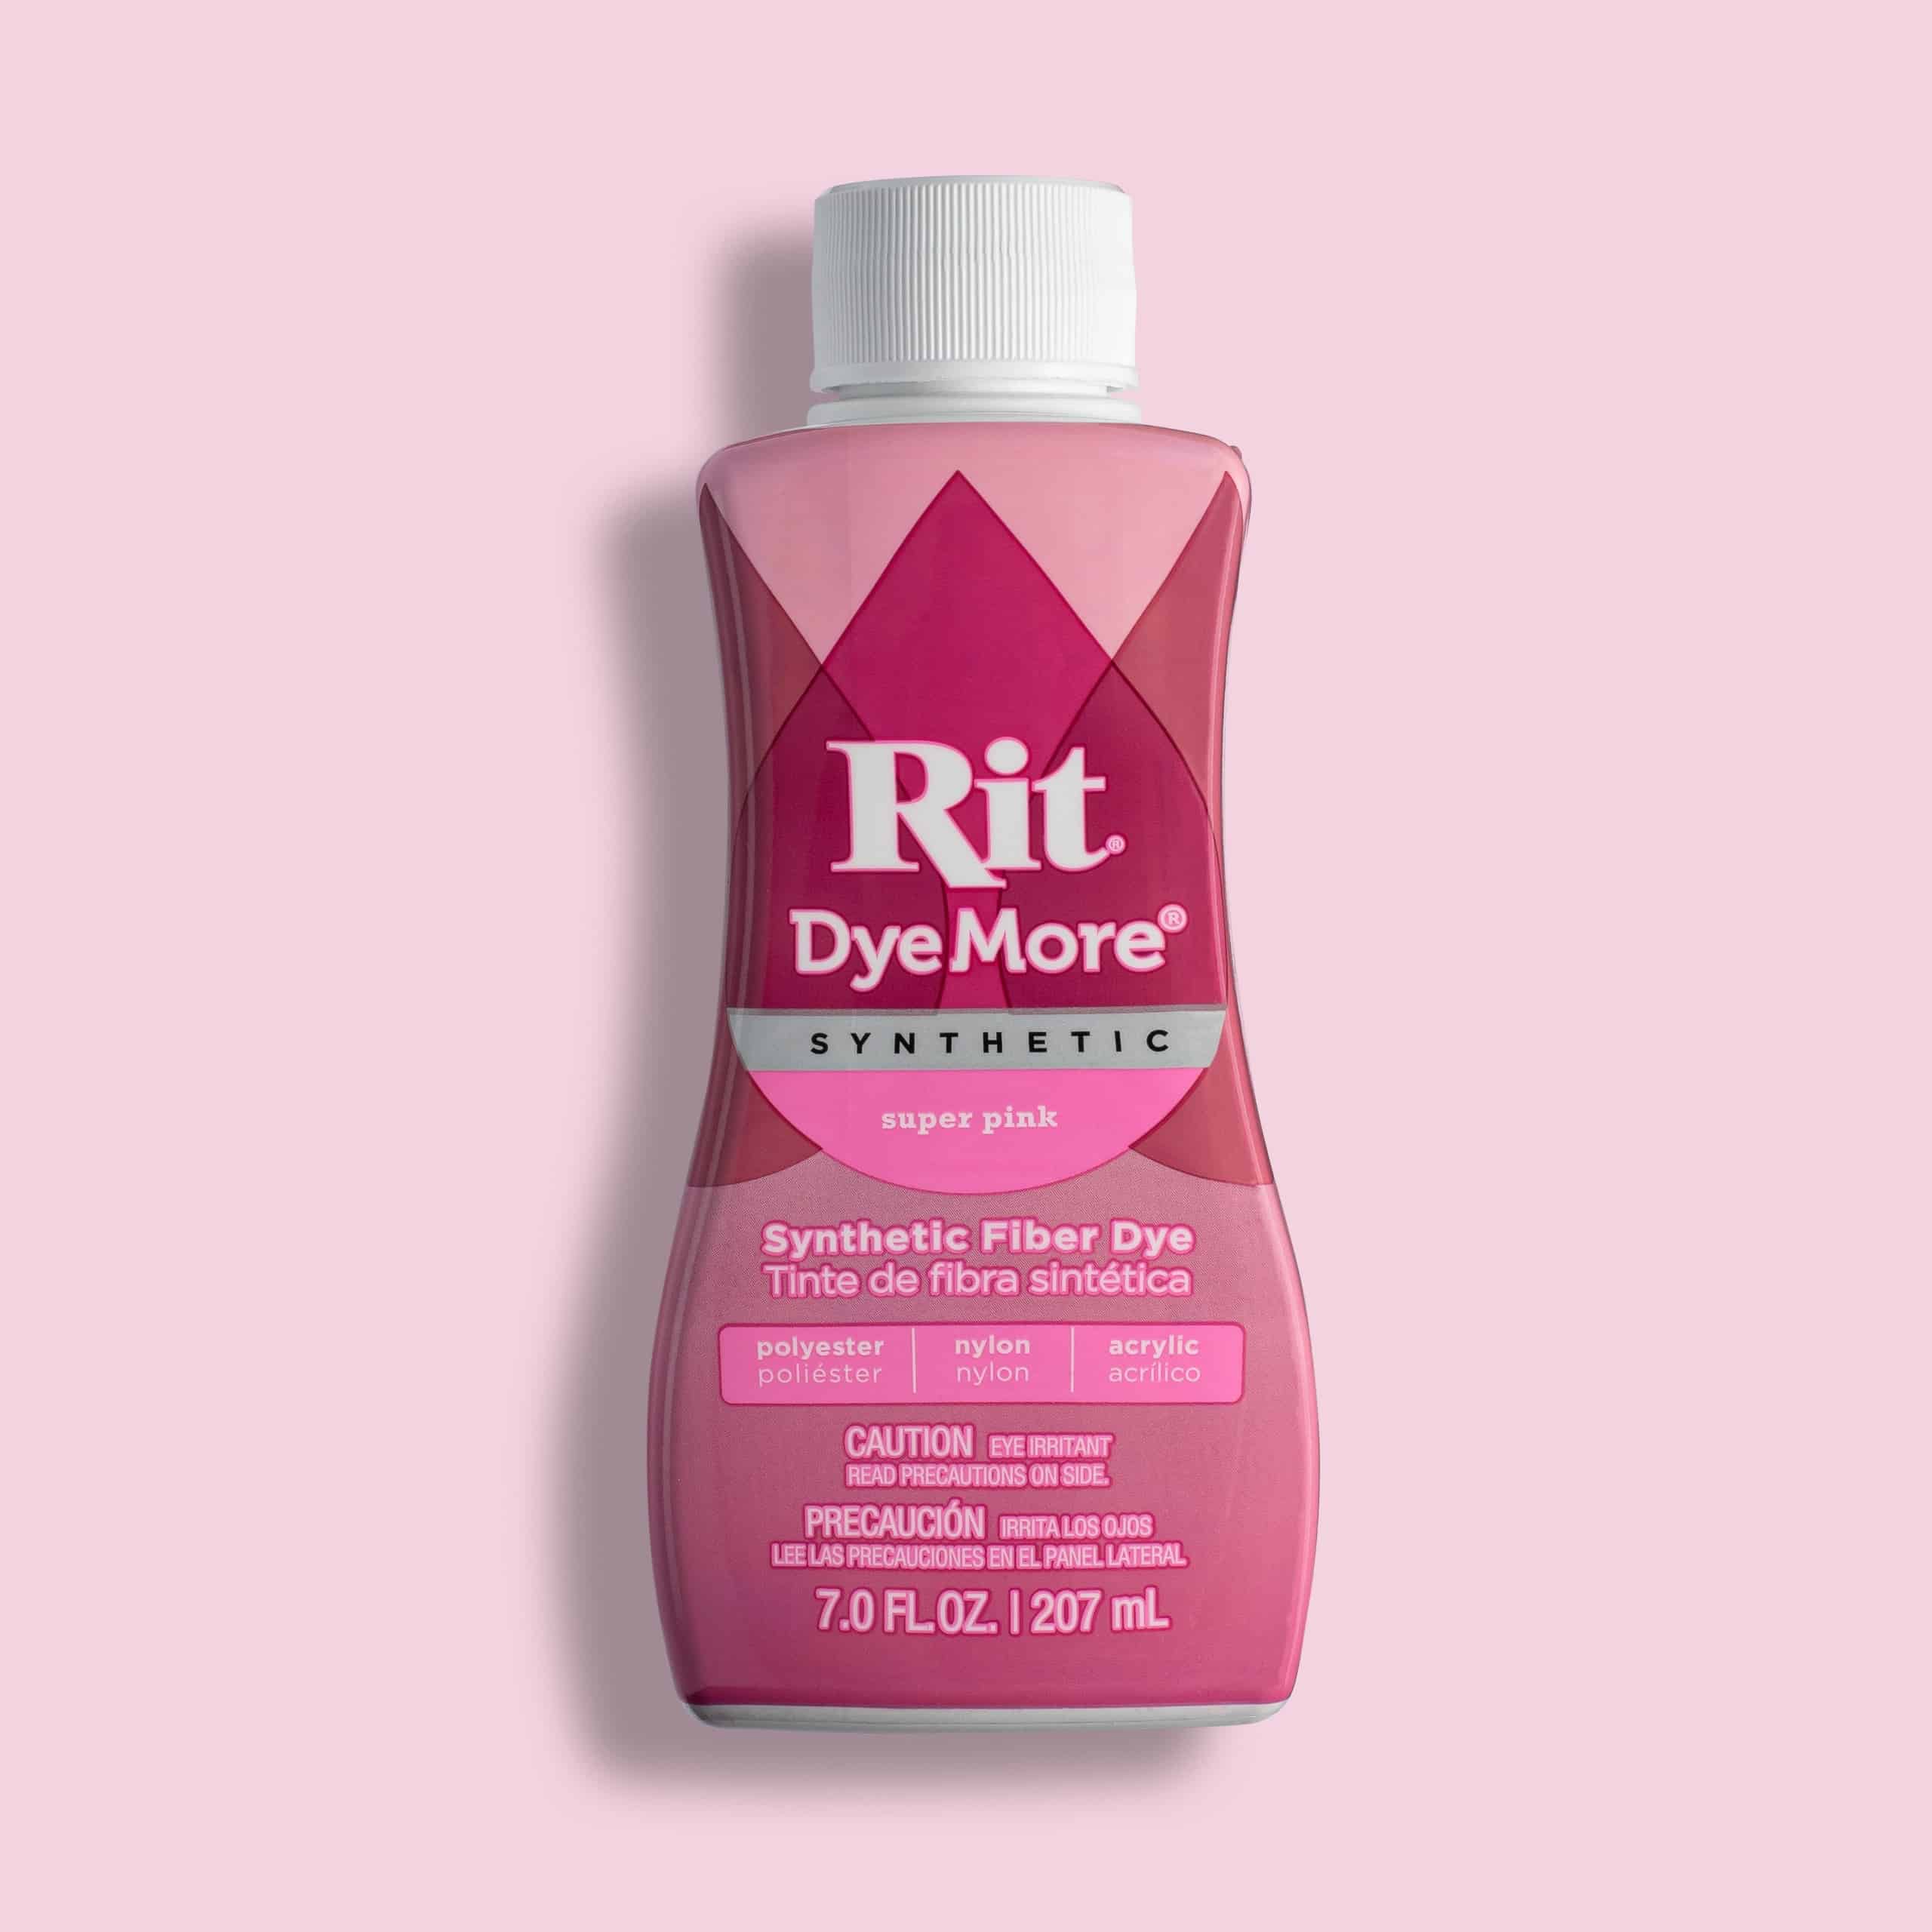 DyeMore for Synthetics – Rit Dye